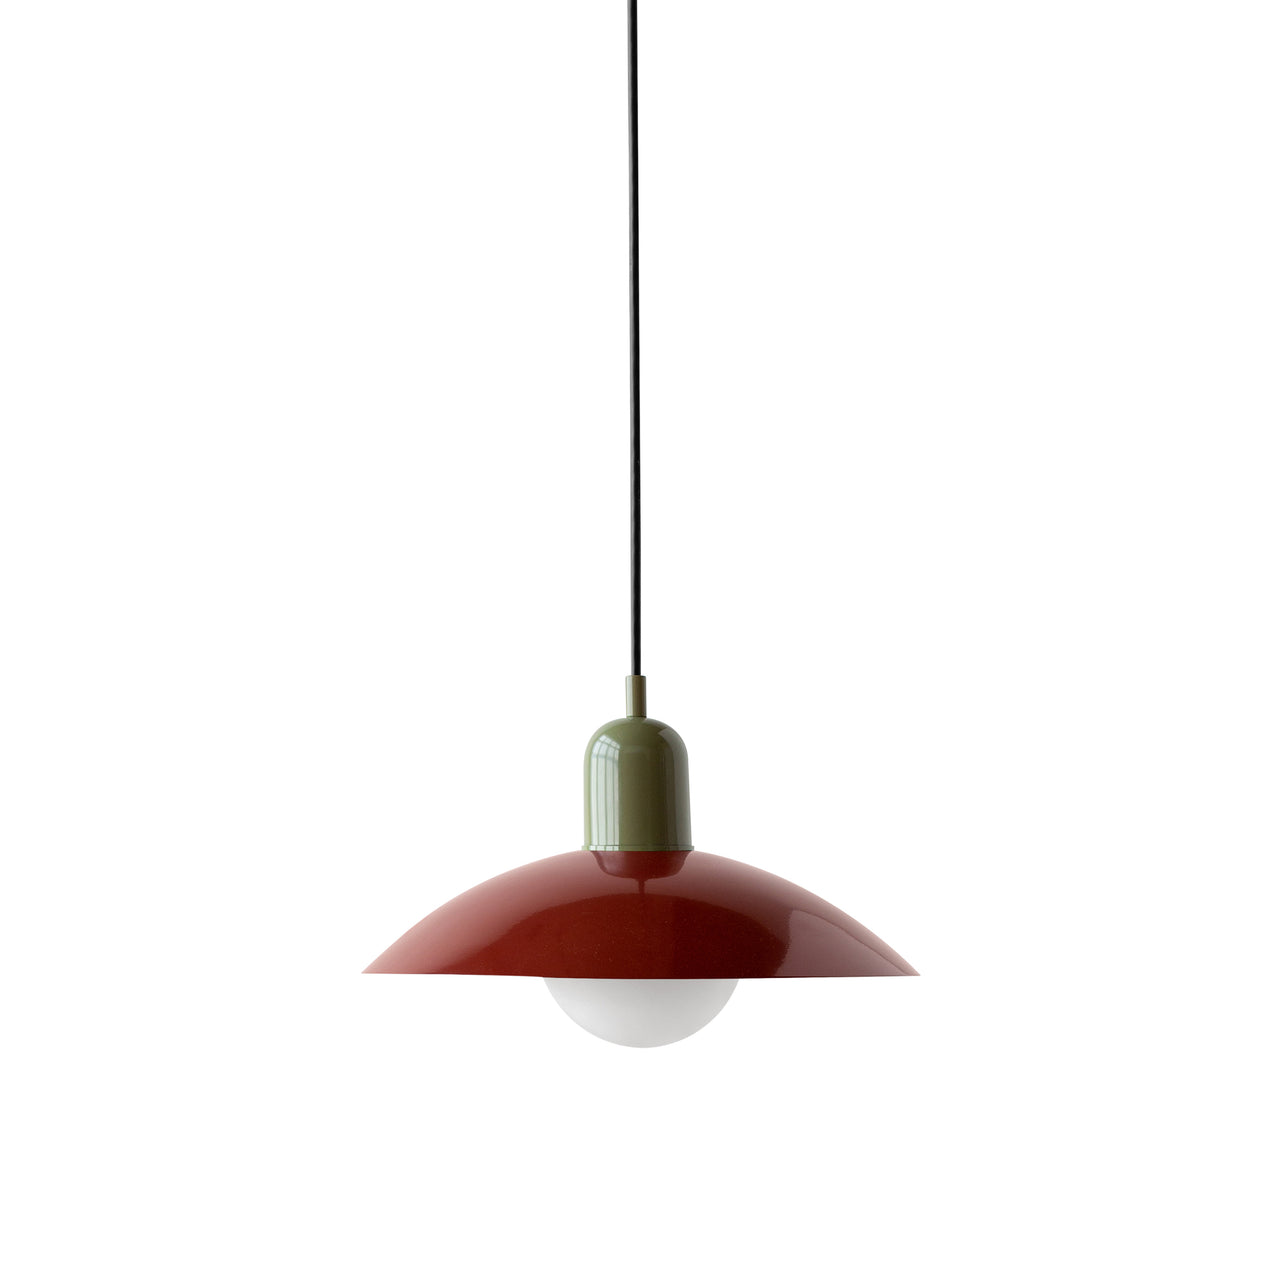 Arundel Orb Pendant: Oxide Red + Reed Green